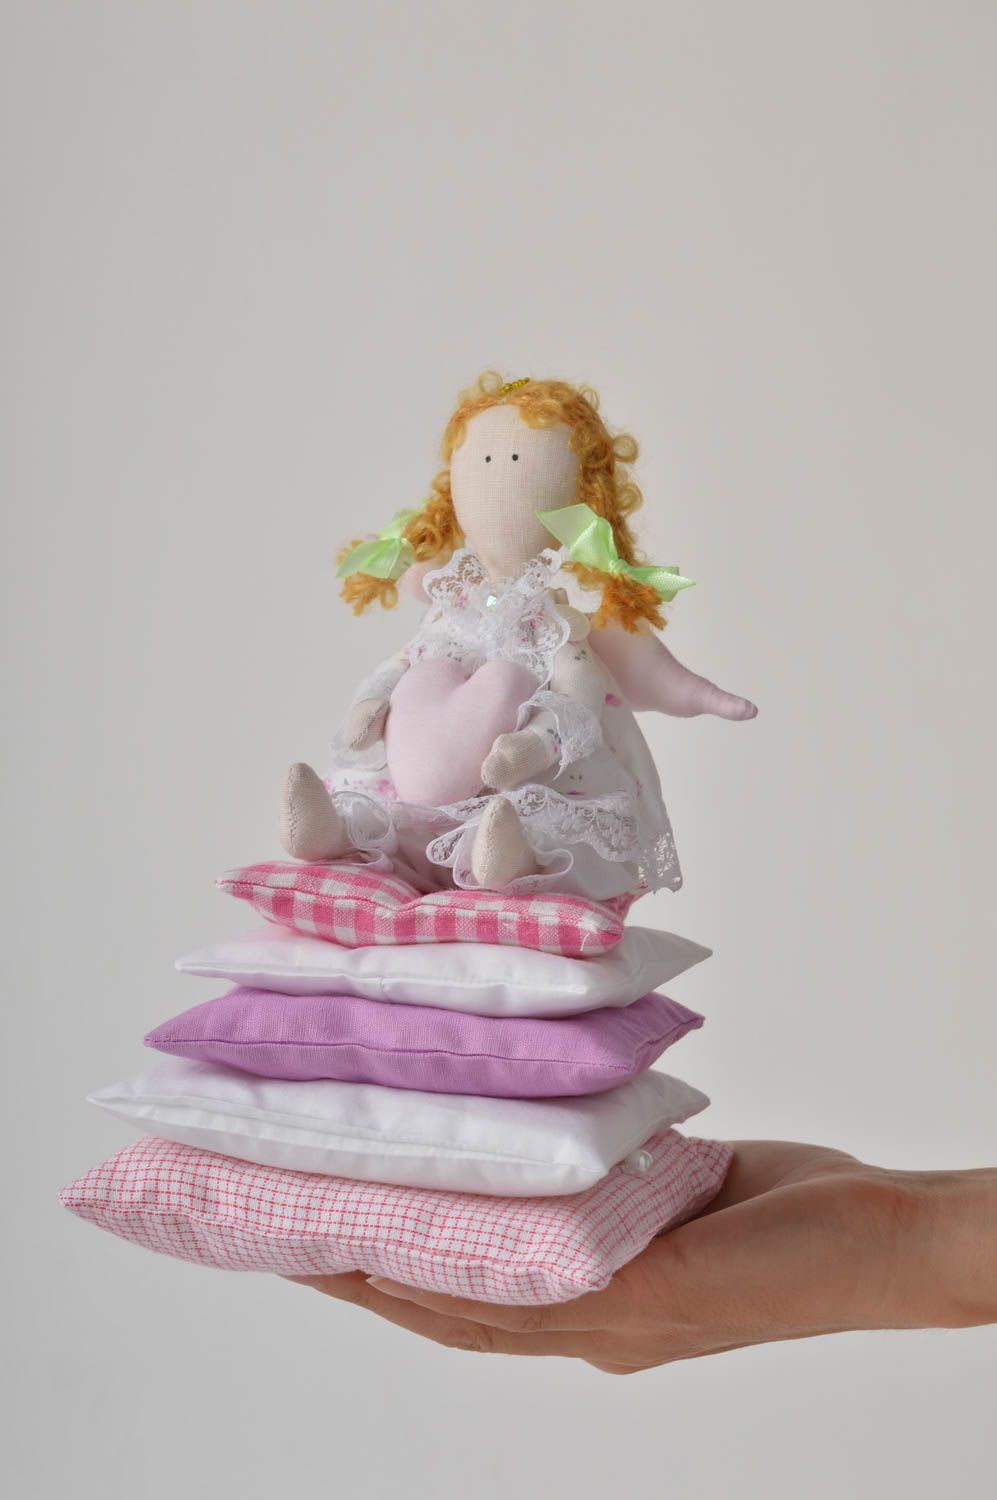 Handmade doll unusual doll with pillow designer toy for girl nursery decor photo 5